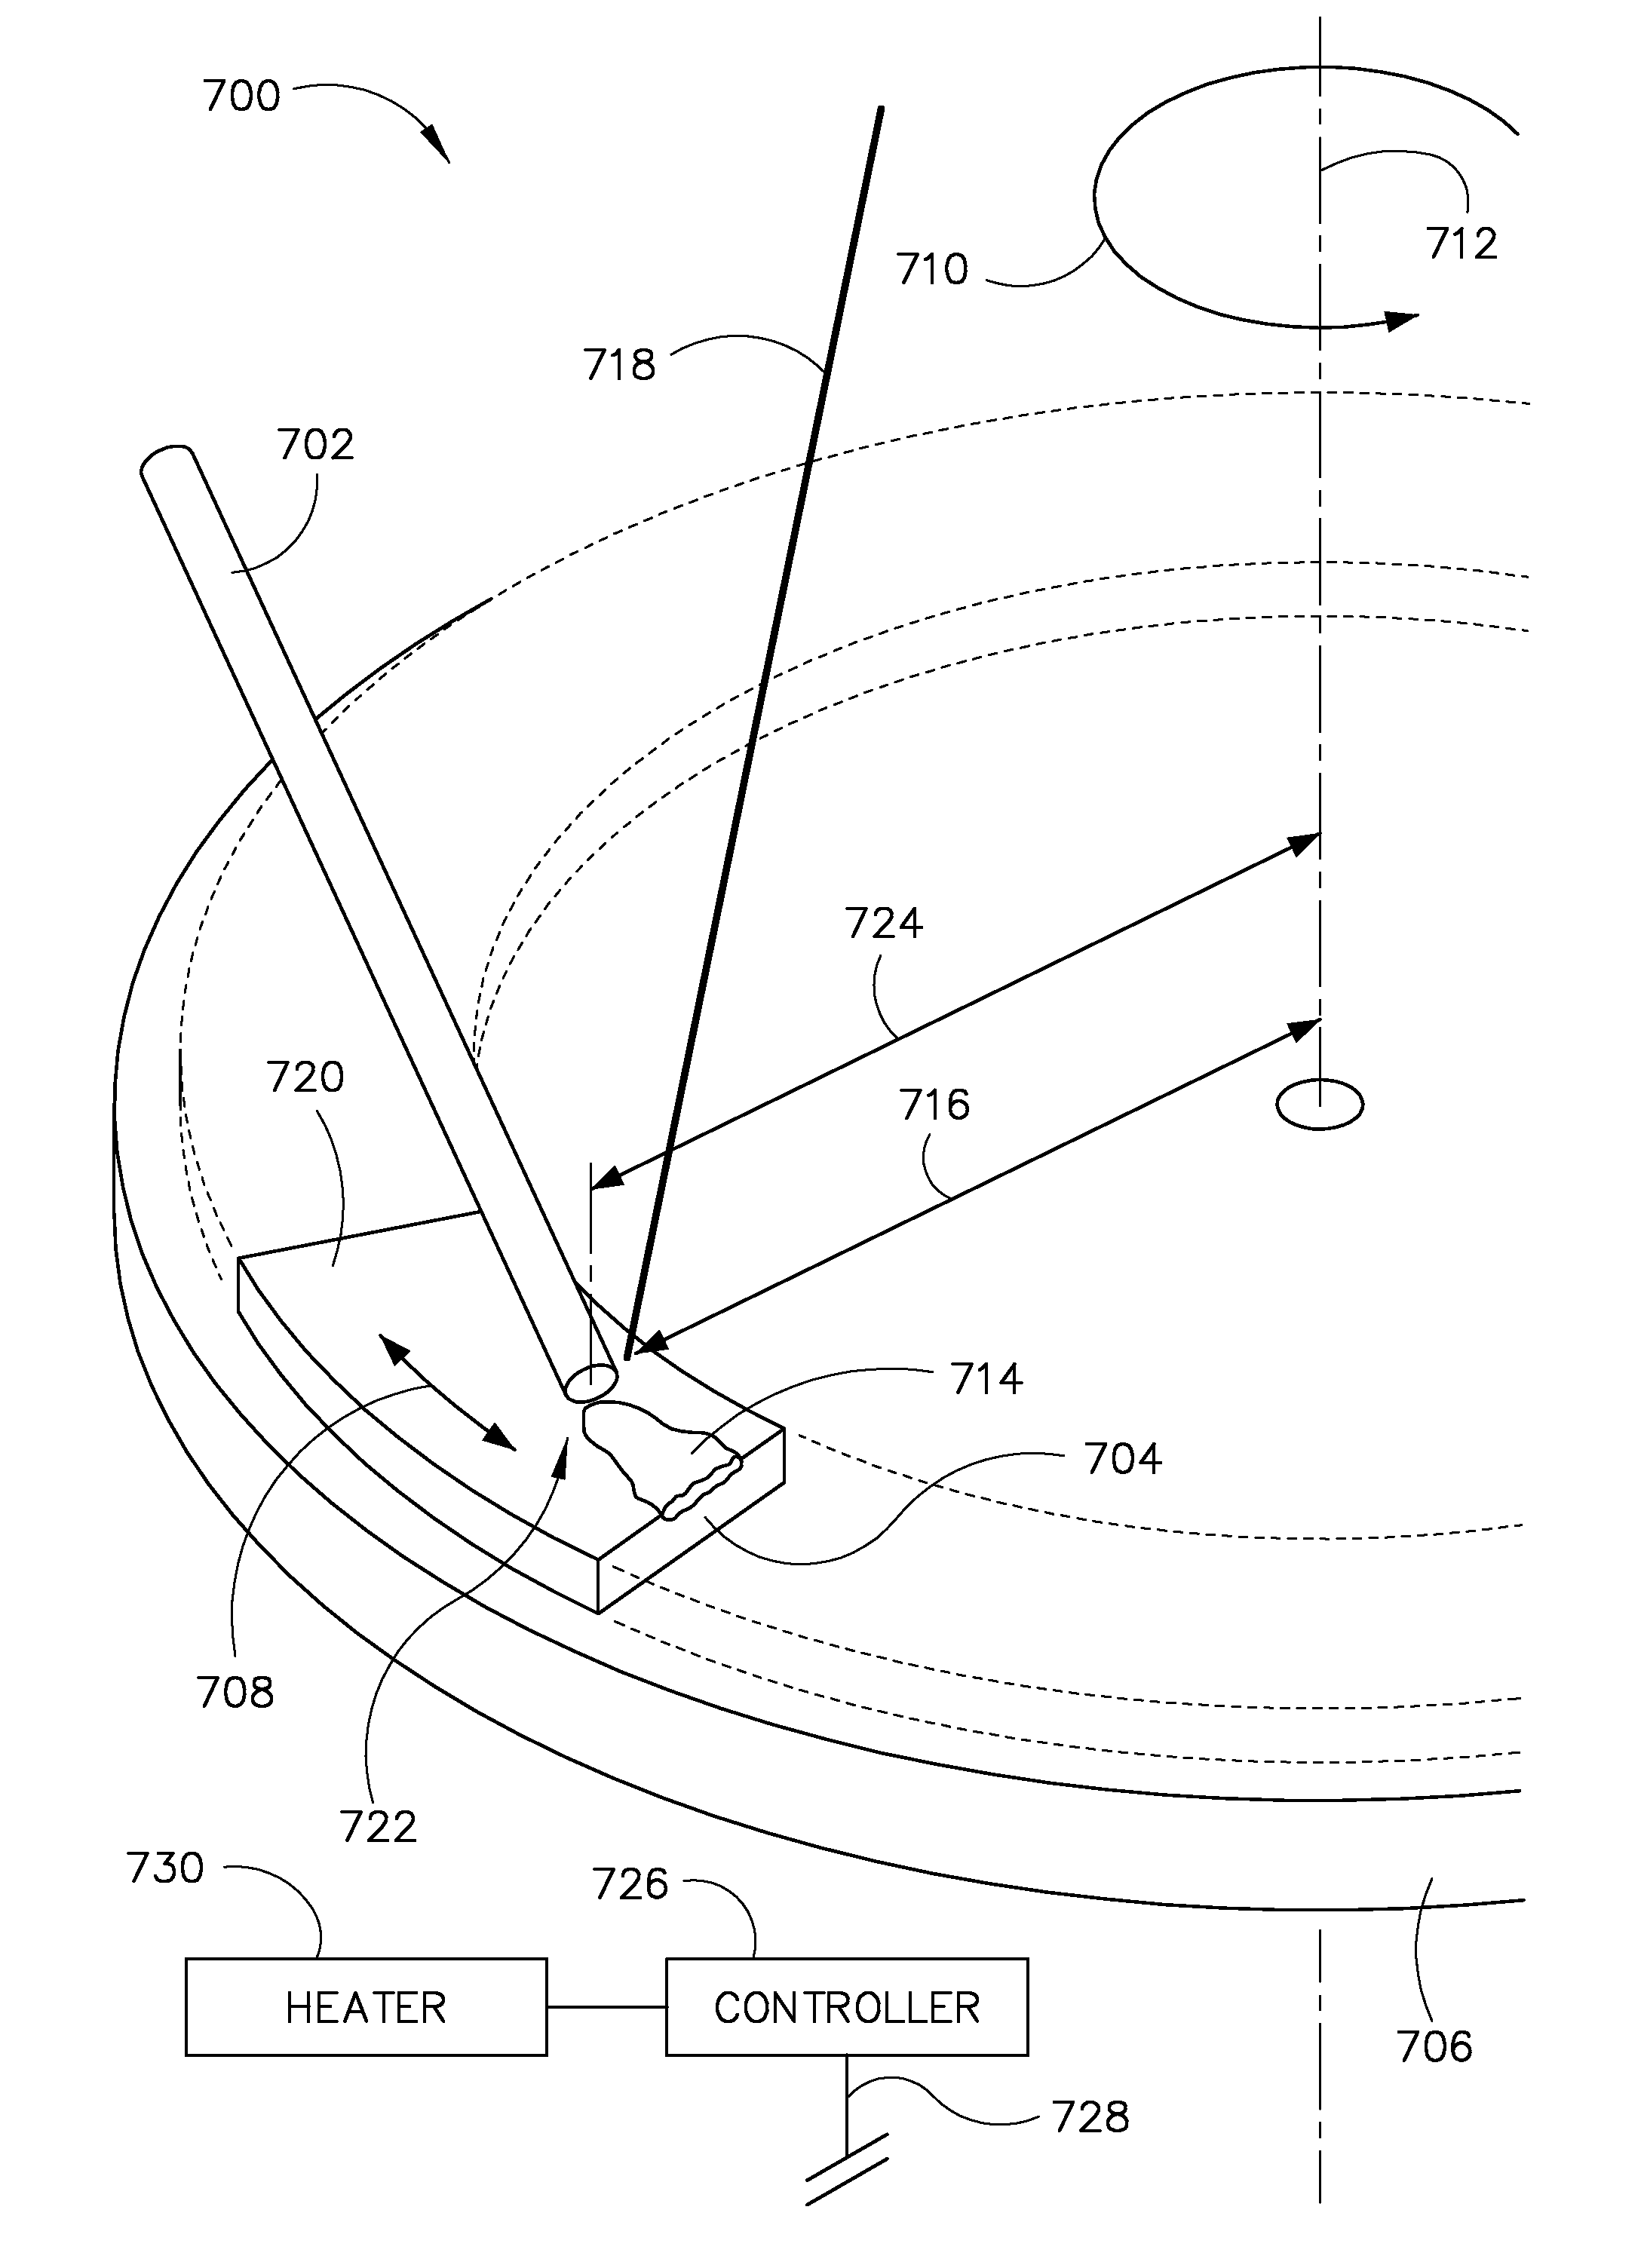 Apparatus for x-ray generation and method of making same